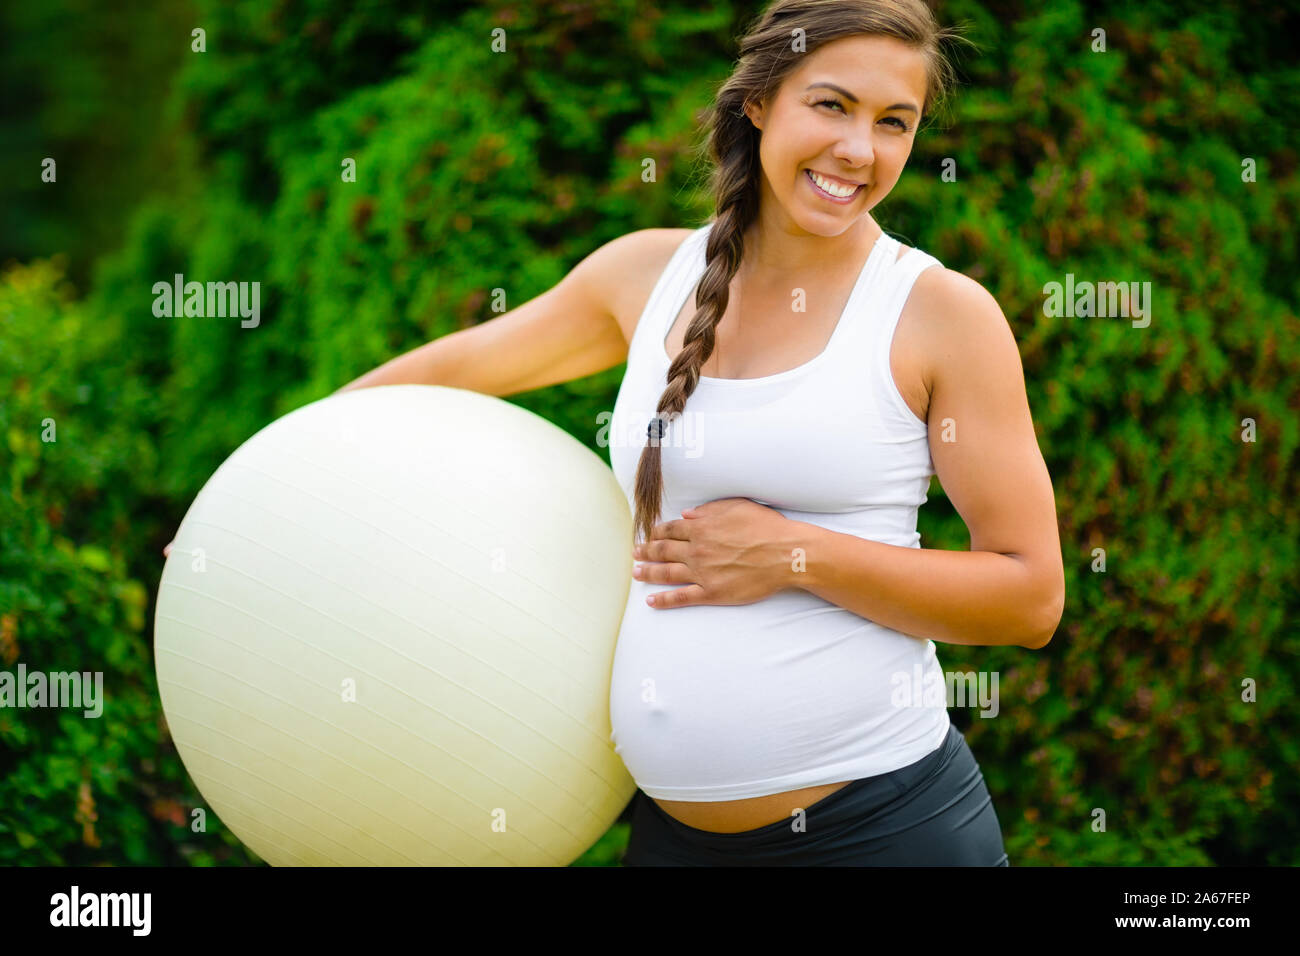 Portrait Of Pregnant Woman Touching Abdomen While Holding Fitness Ball Stock Photo